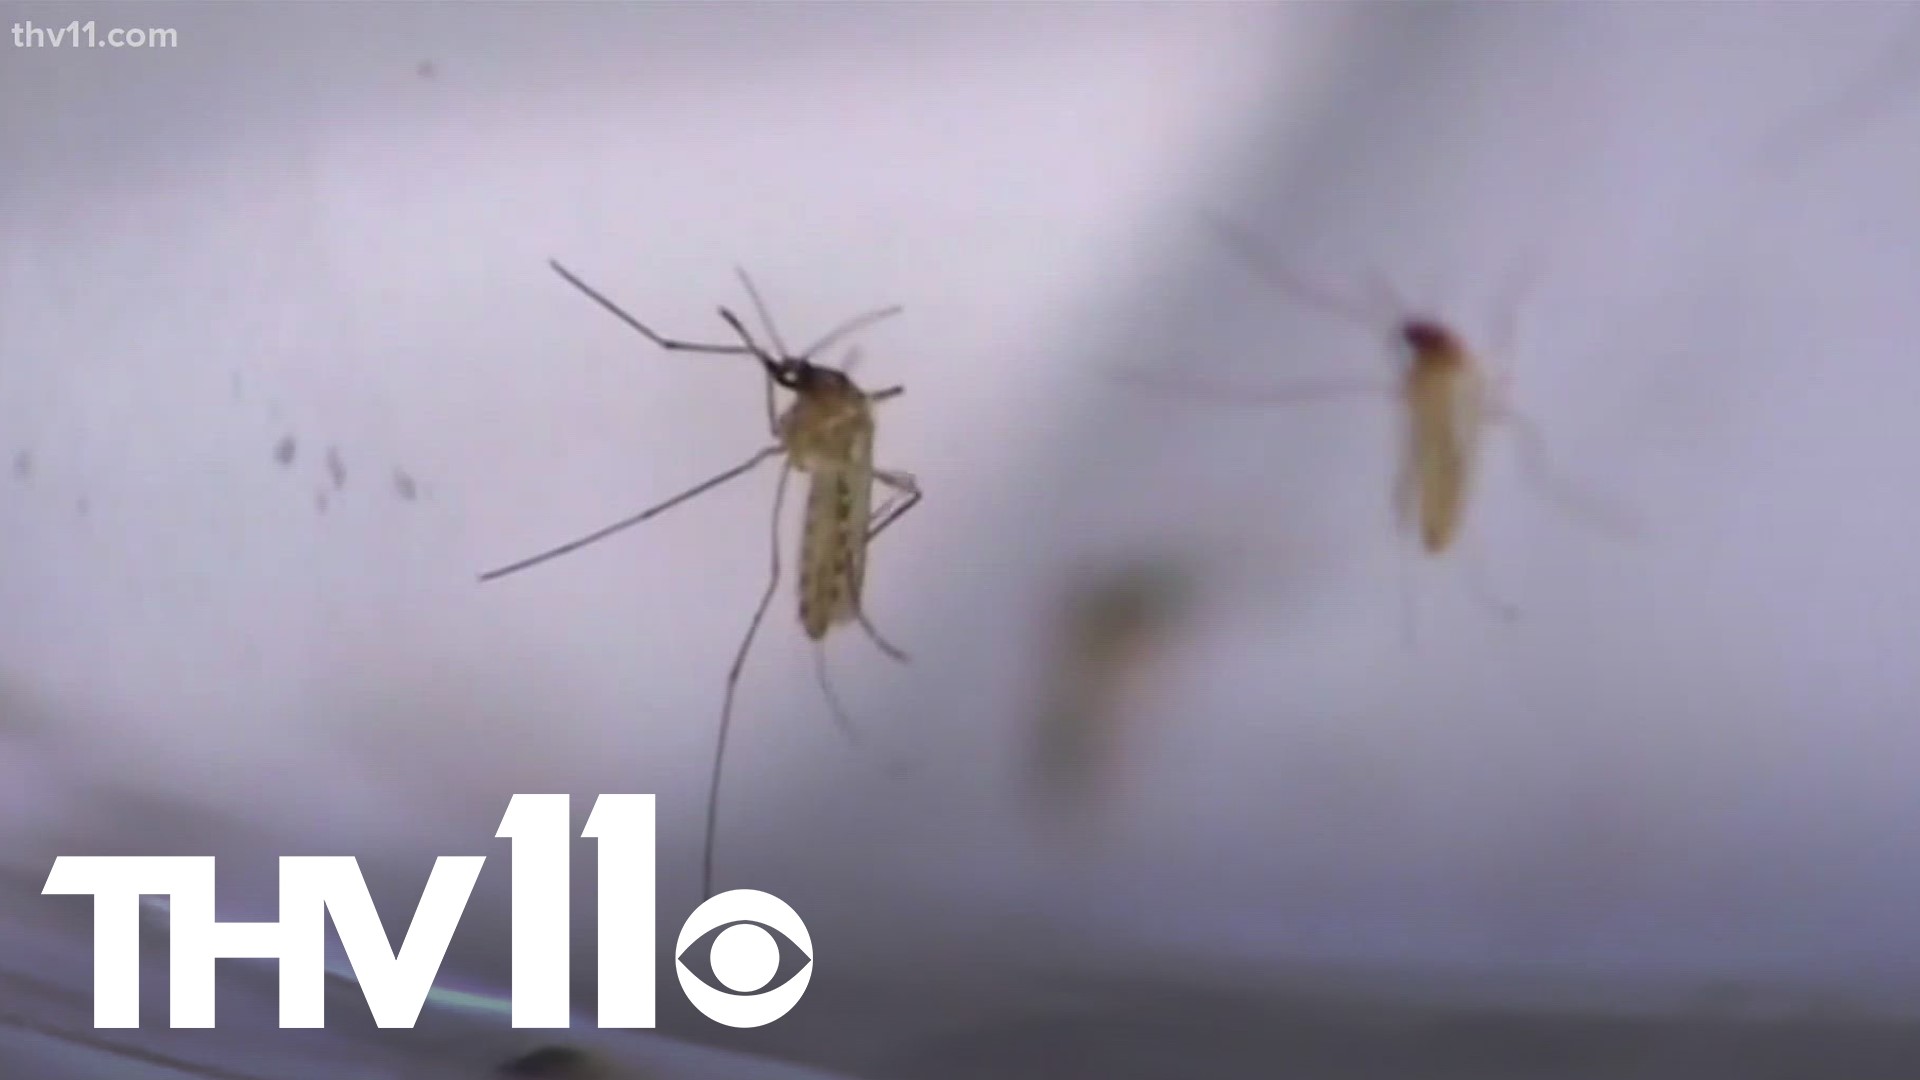 For the first time in years, cases of Malaria have been transmitted in the U.S., and now we're looking into what the risk of spread looks like in Arkansas.